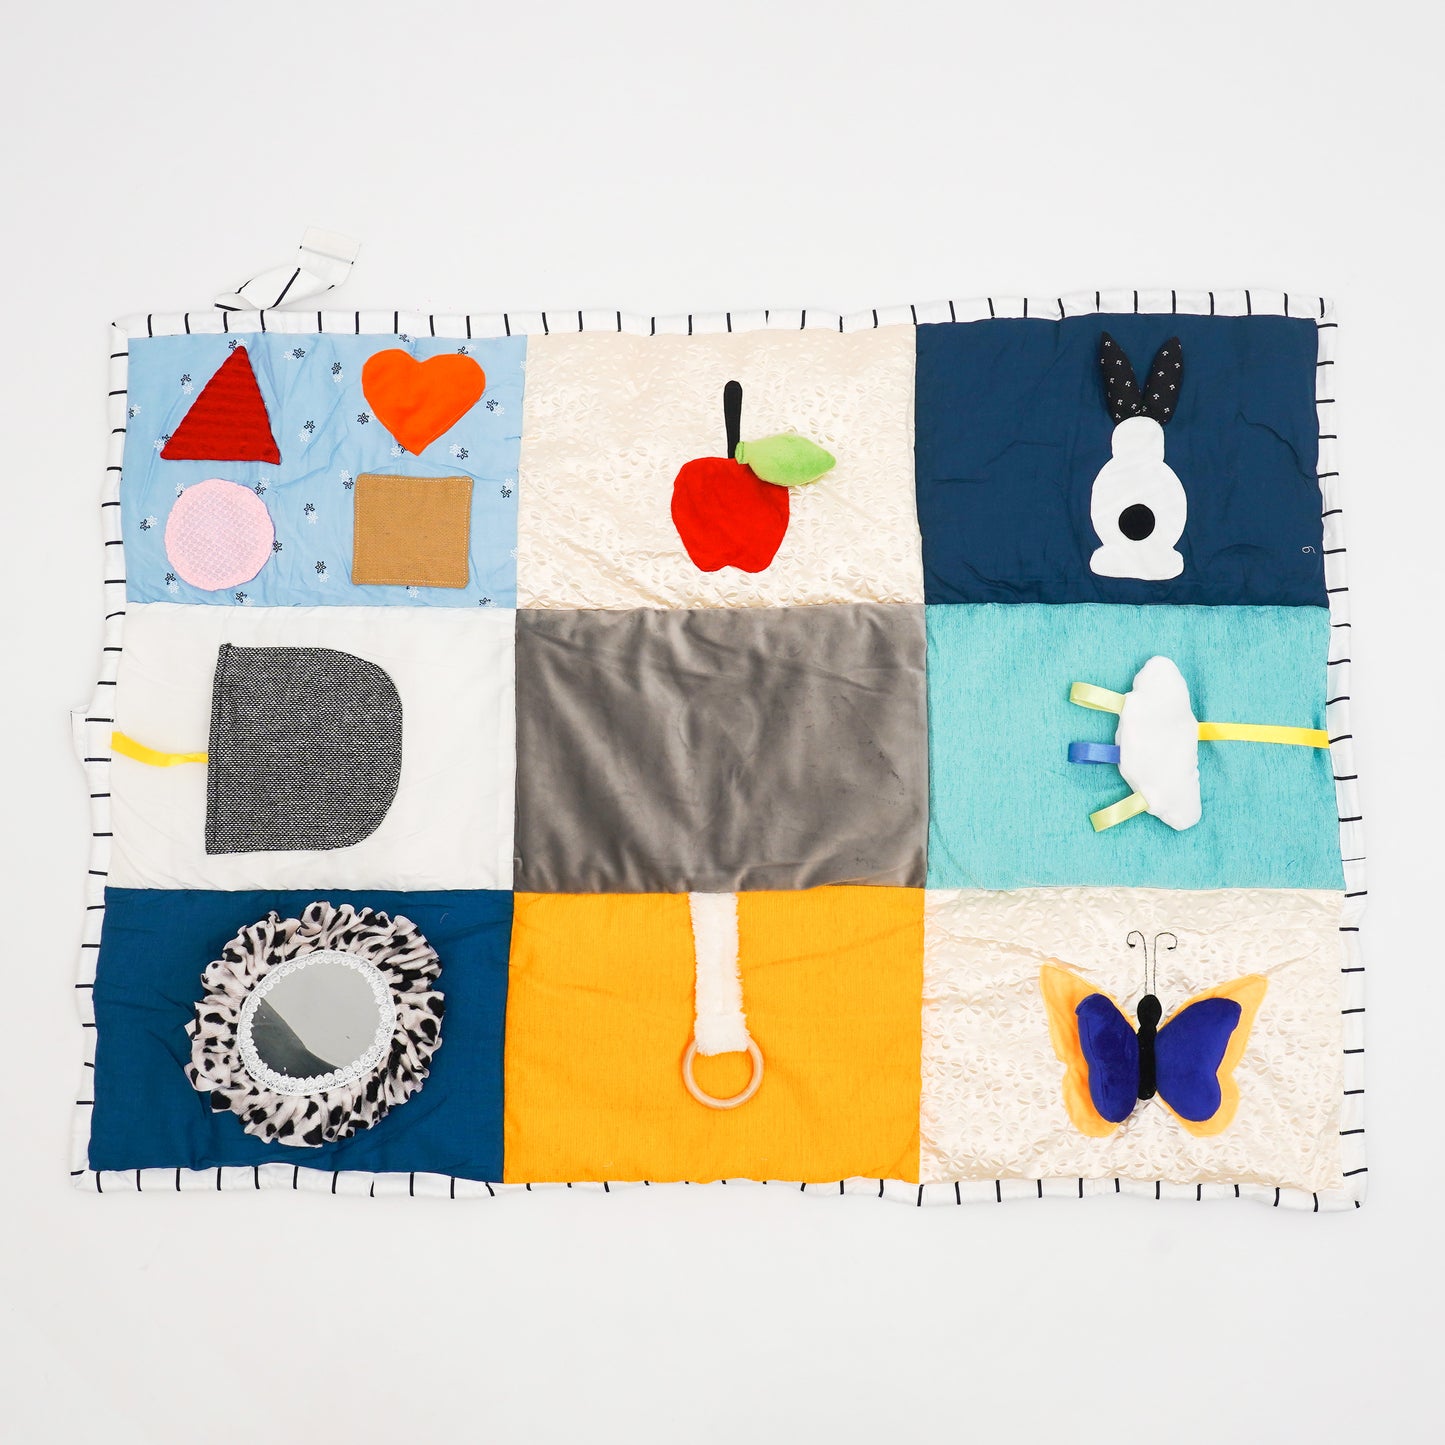 Sensory Cloth Play Mat with Tummy Time Mirrorfor 0-1 Year Babies